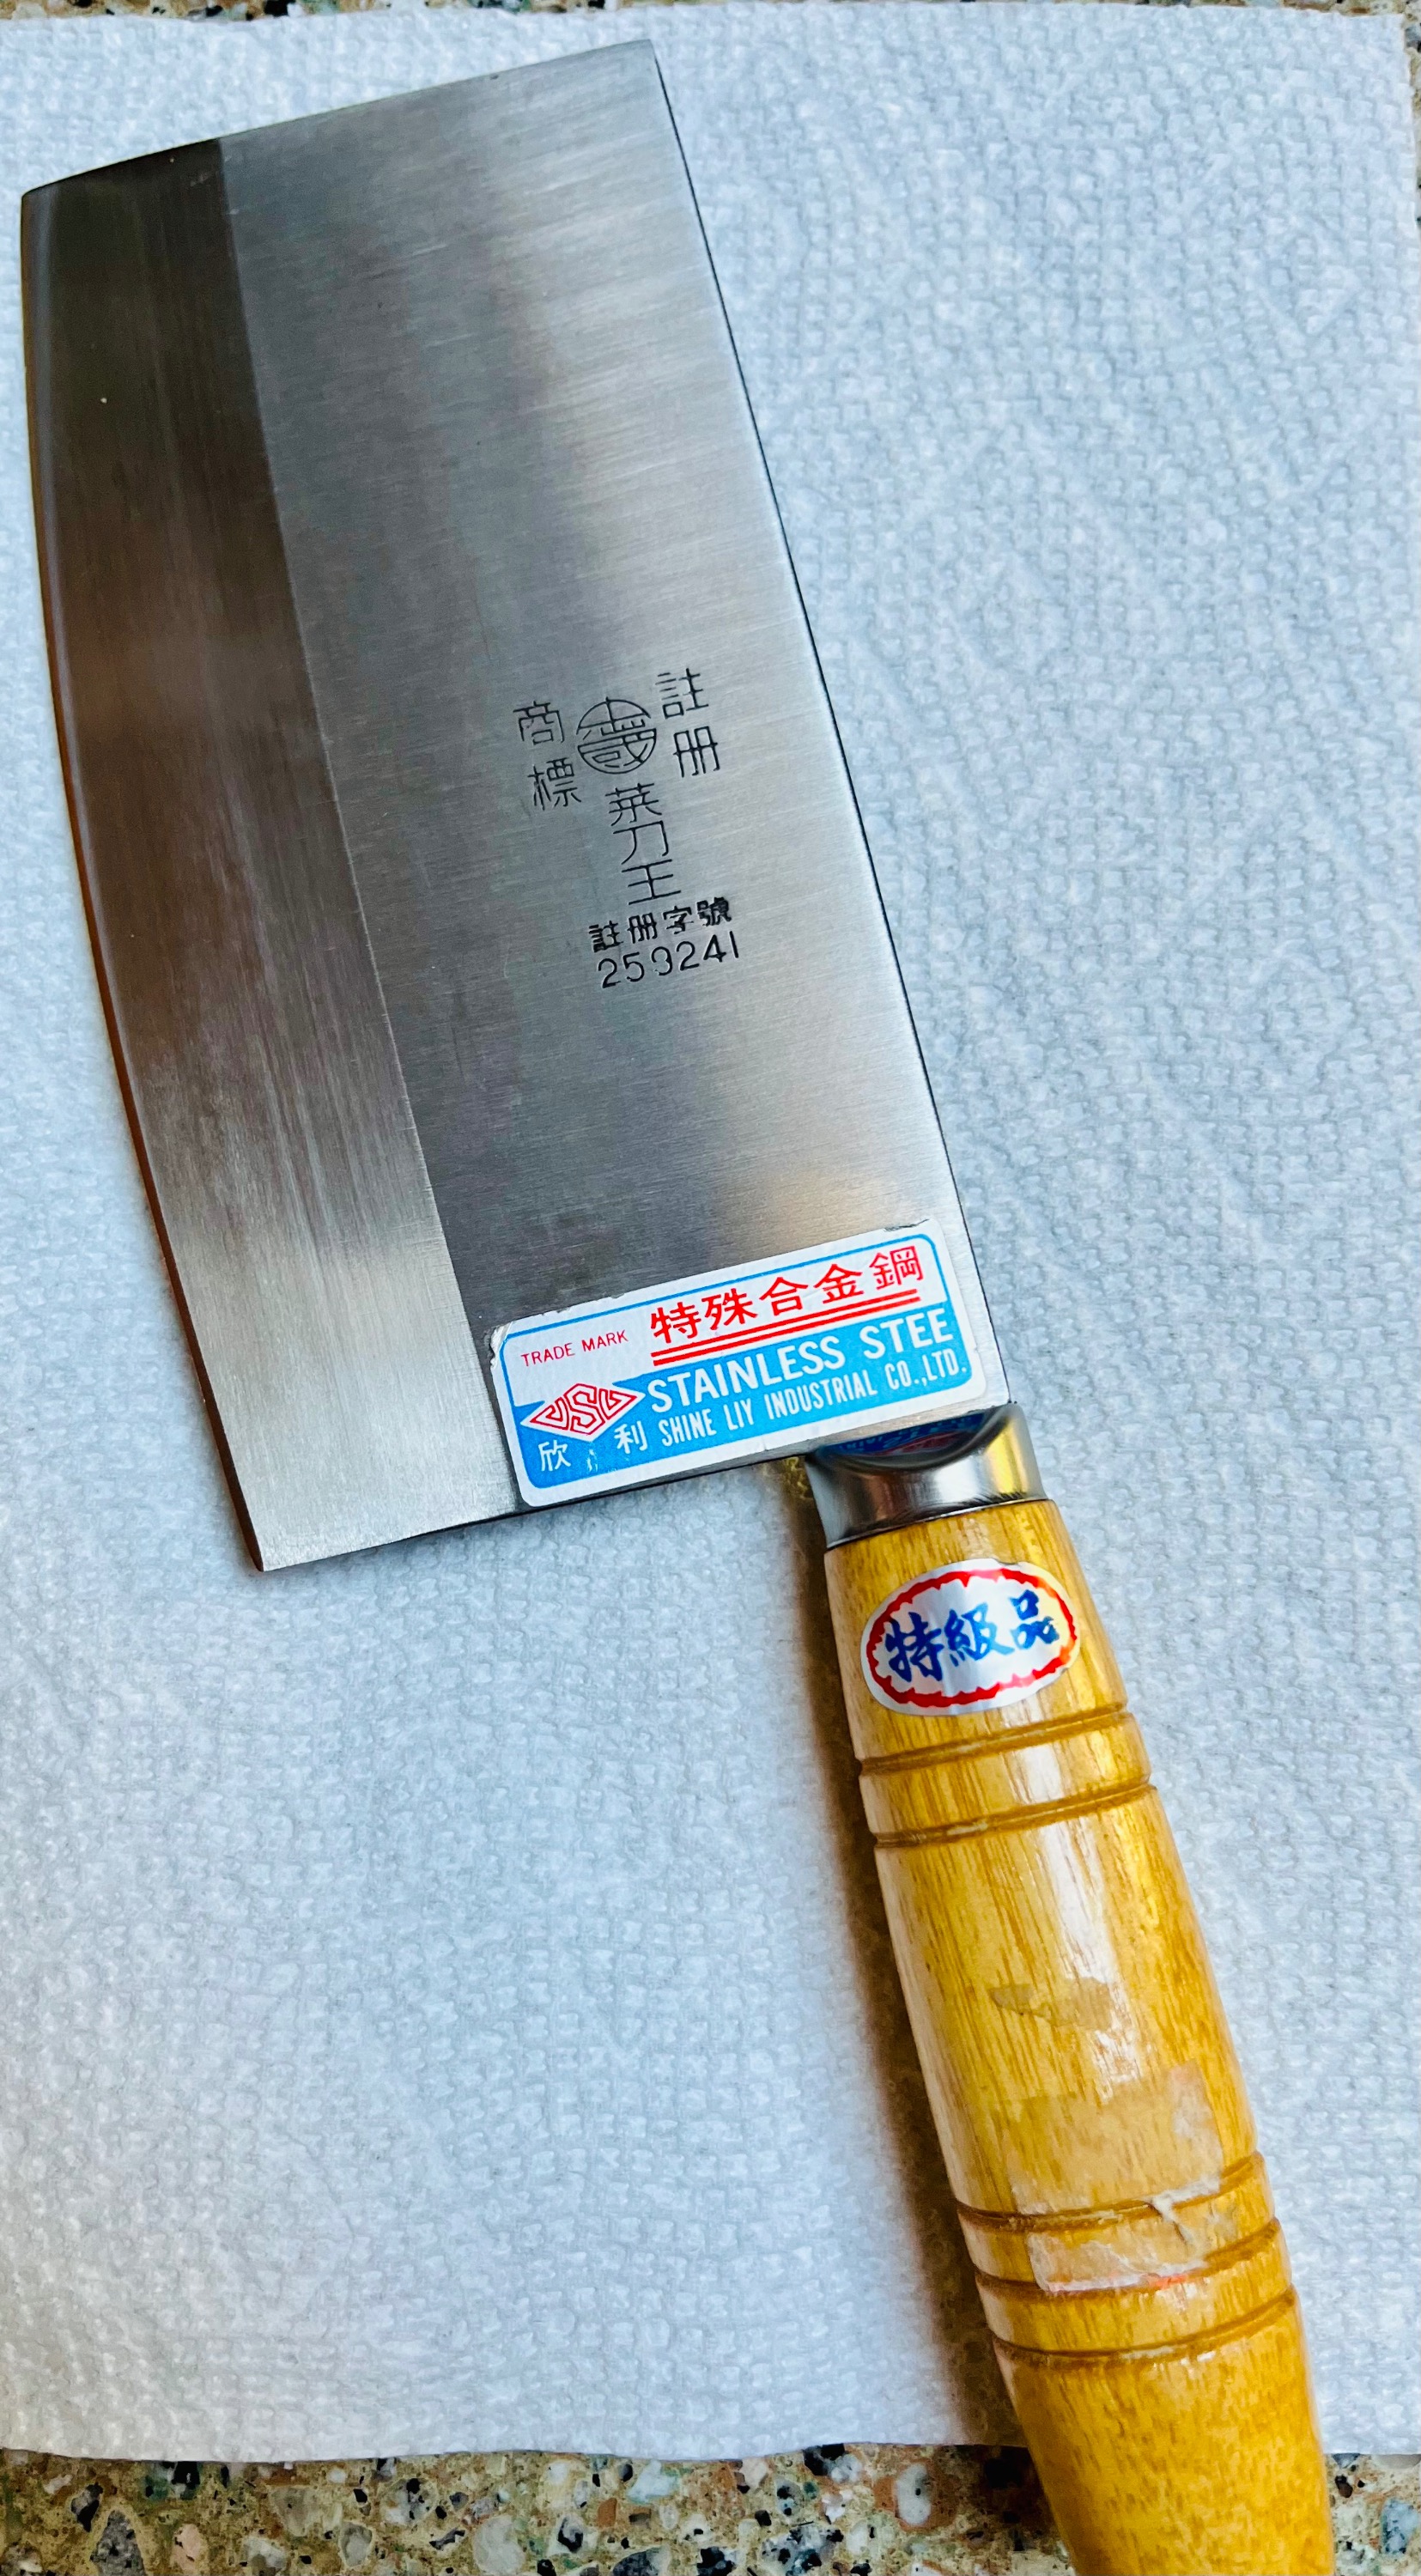 Dexter Knife and Sharpener Super Stainless Southbridge Mass. From